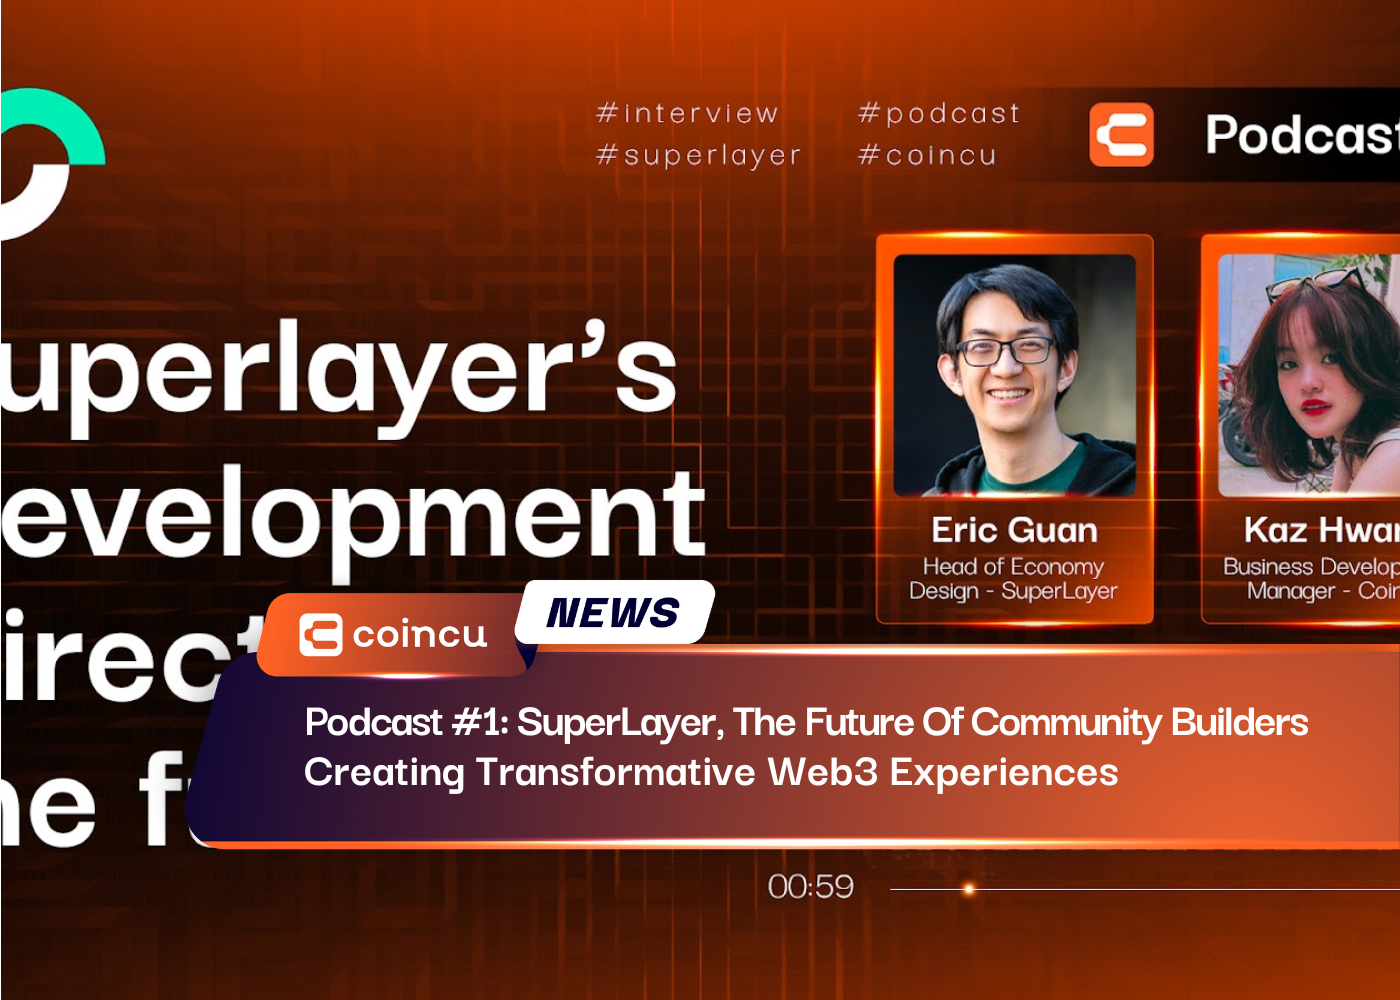 Podcast #1: SuperLayer, The Future Of Community Builders Creating Transformative Web3 Experiences